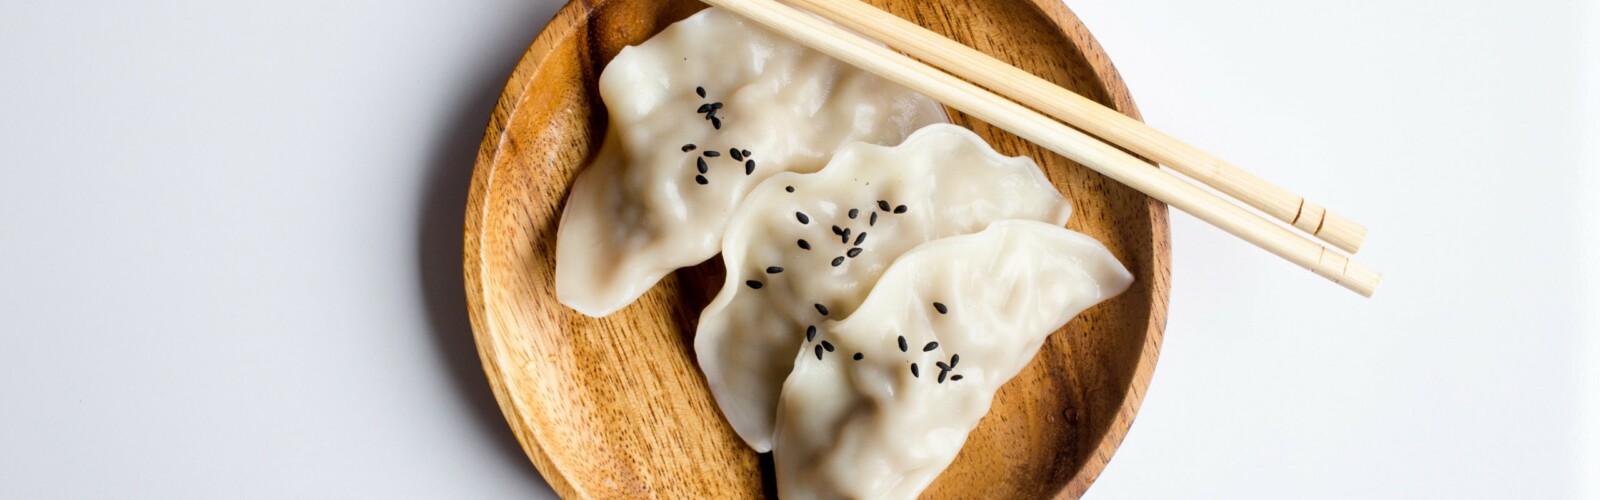 White dumplings on a bamboo plate, with chopsticks on the side